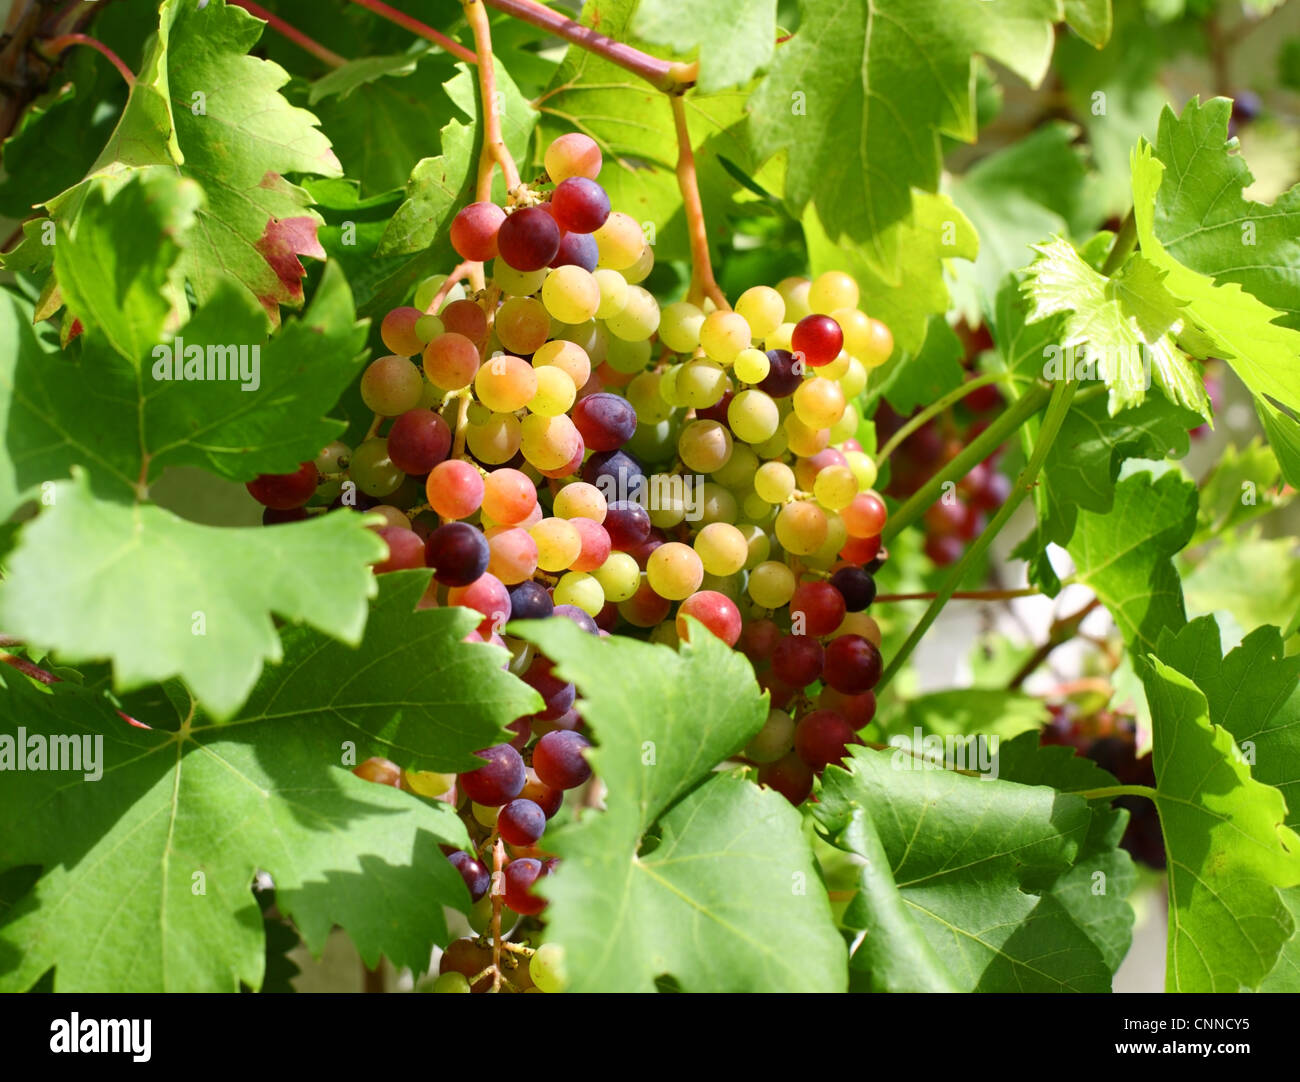 Unripe grapes and vine leaves close up Stock Photo